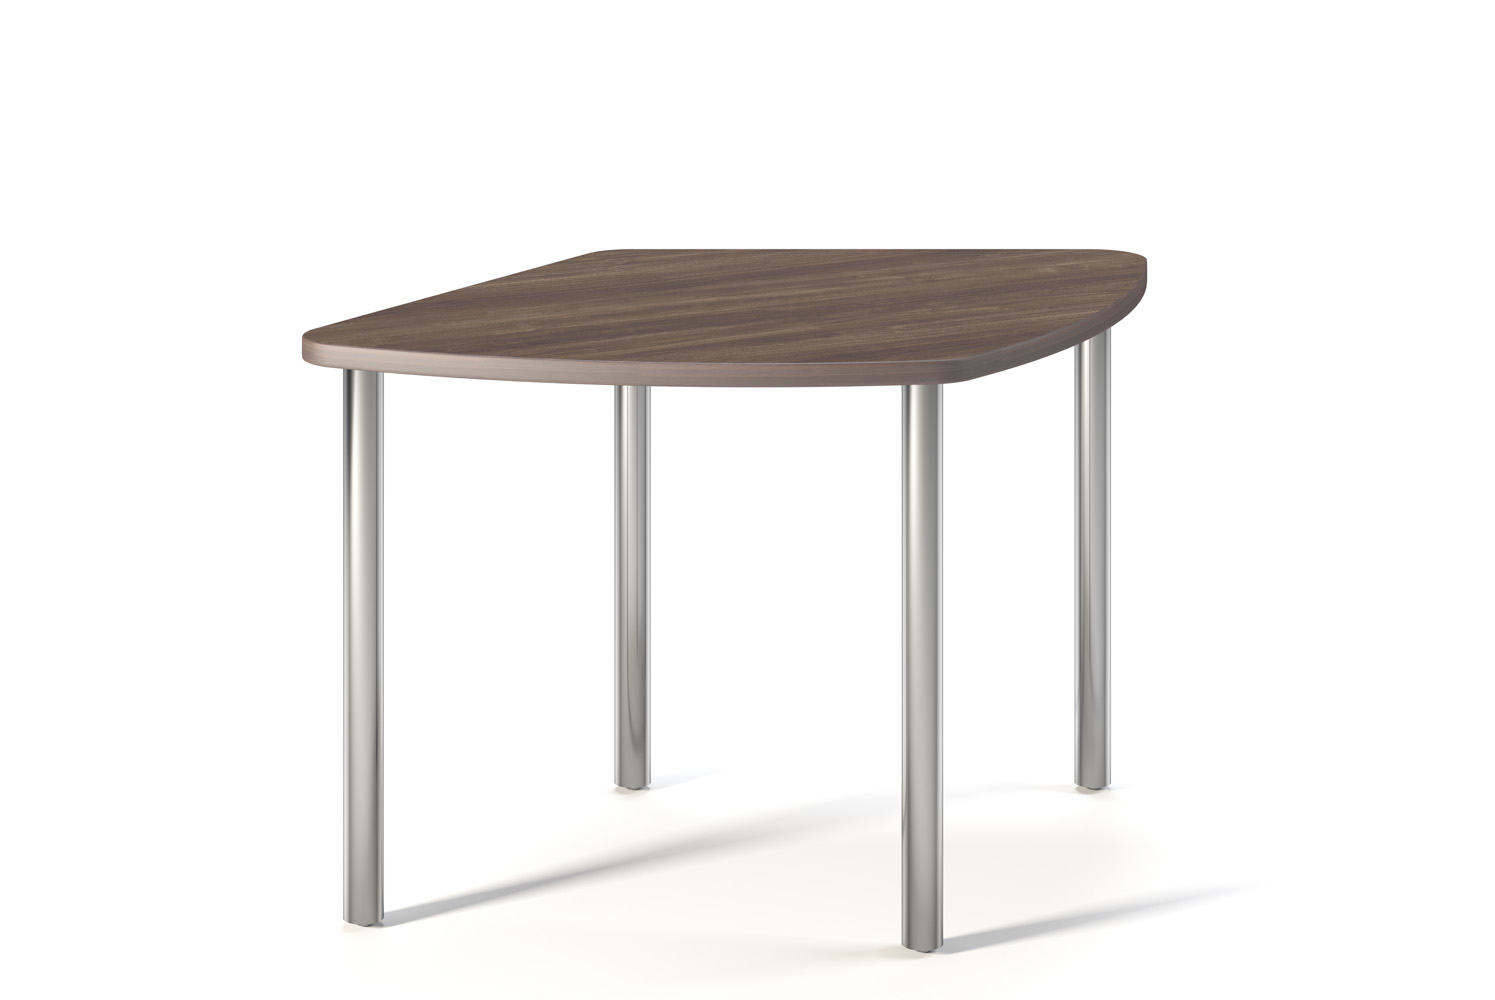 Post Tilted Square Table